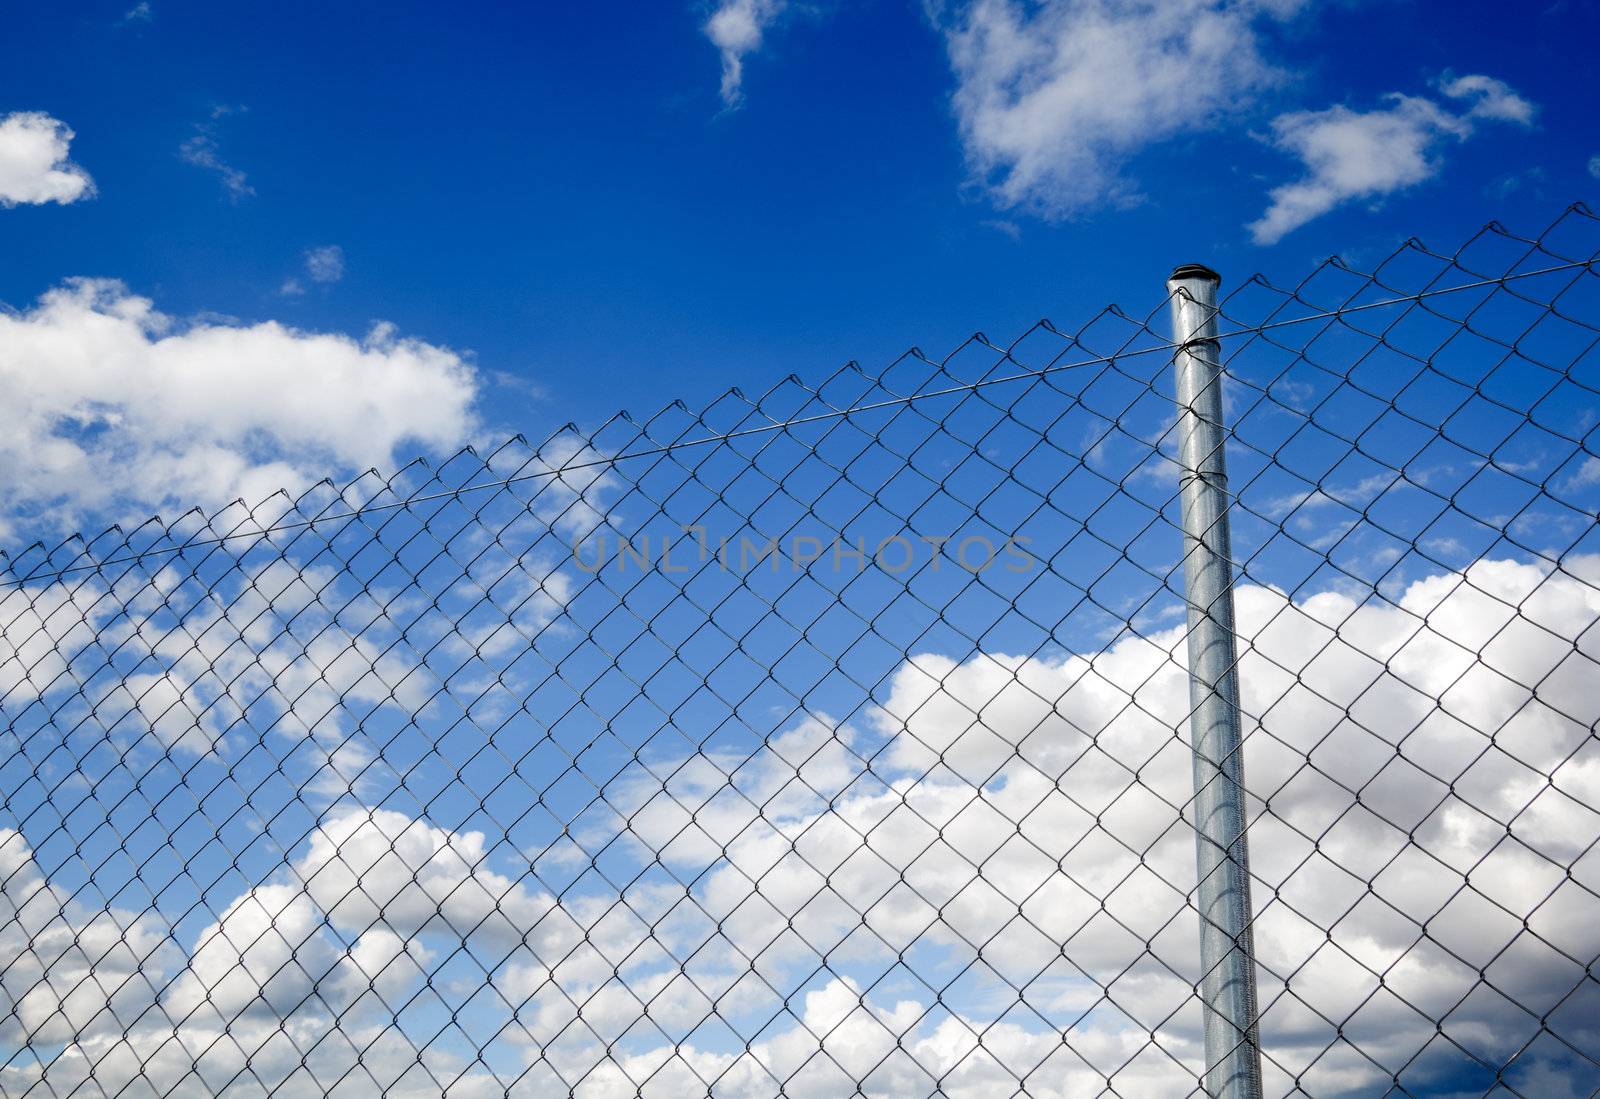 Suggestive image of metal fence against the sky